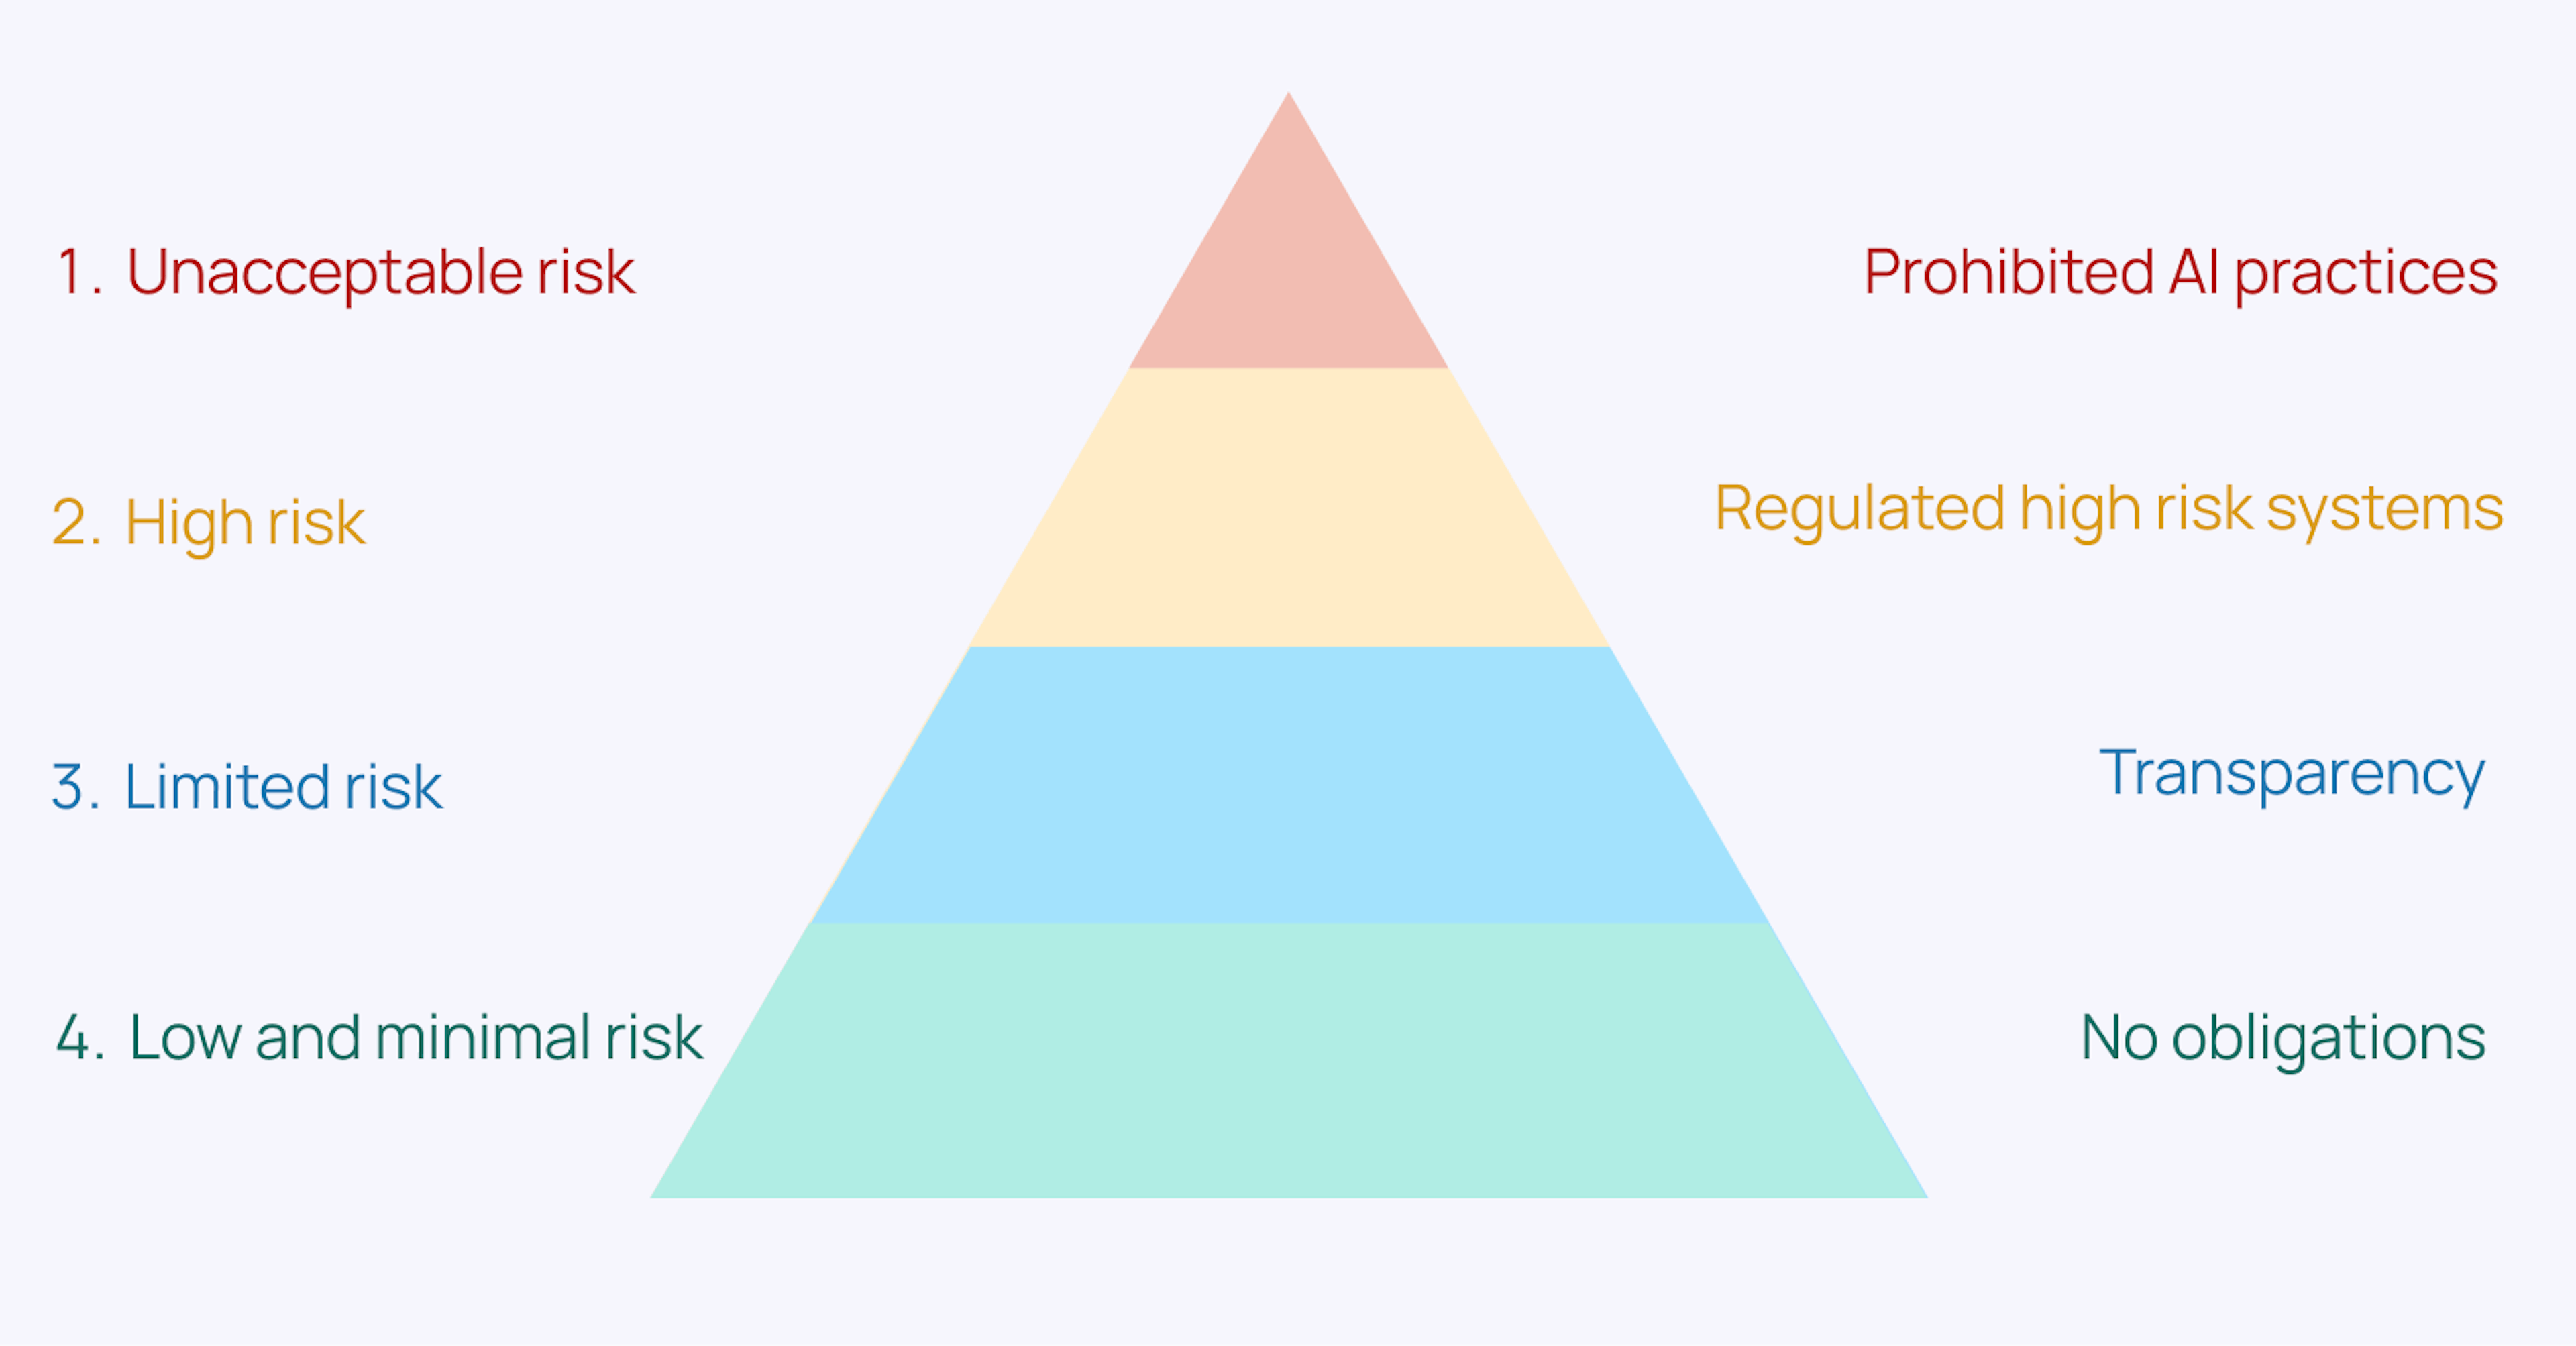 The EU AI Act classifies AI applications into four risk levels: 1) Unacceptable risk, 2) High risk, 3) Limited risk and 4) Low and minimal risk. The higher the risk, the stricter the rules.